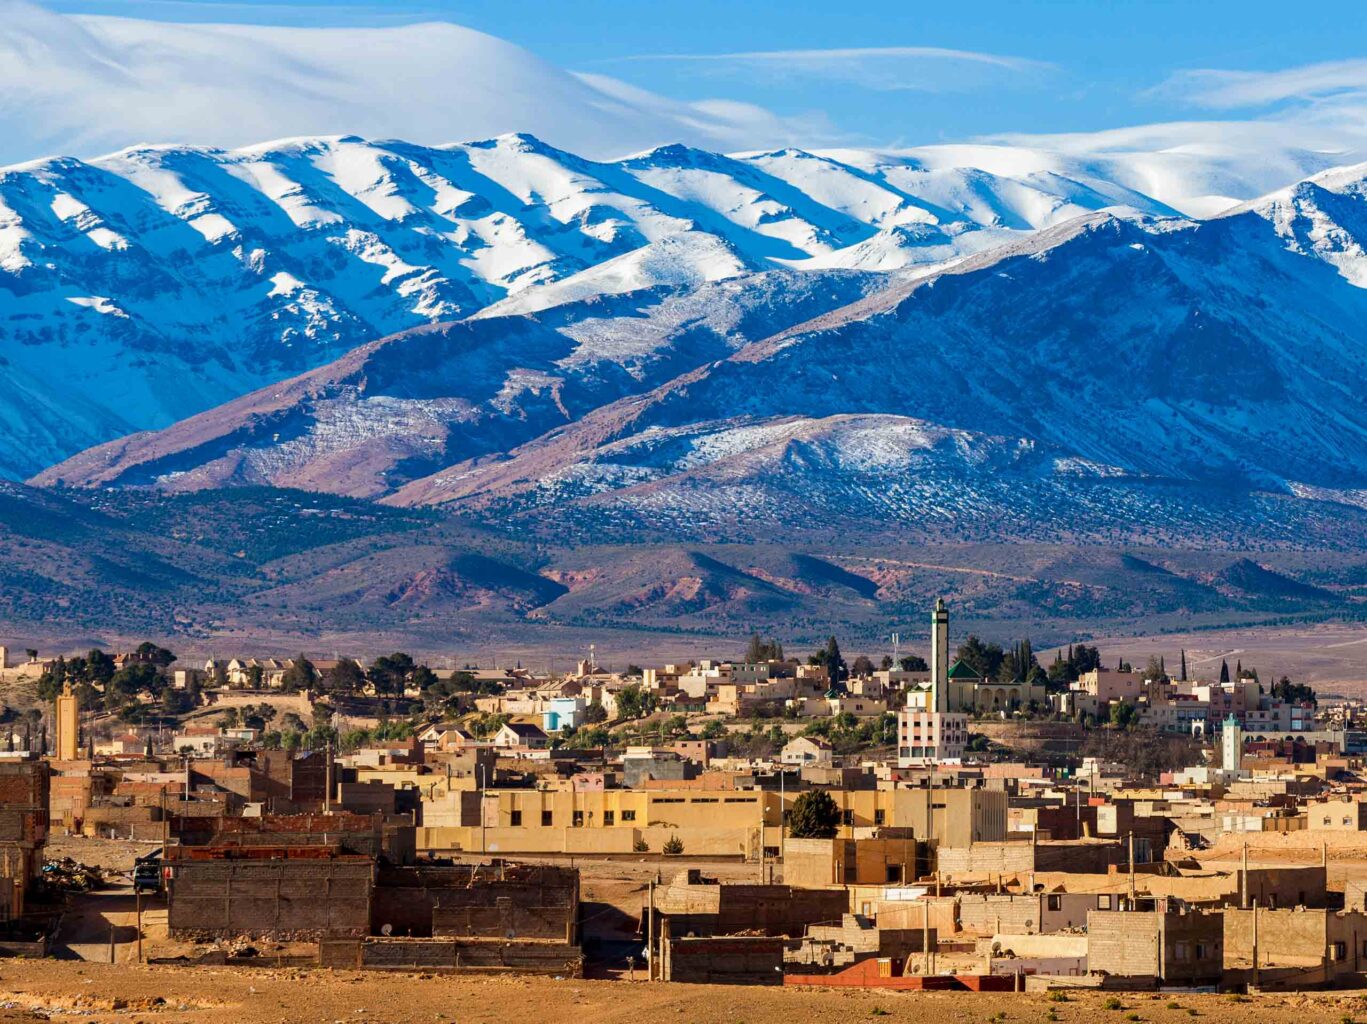 Winter snows cover the High Atlas Mountains in the background with a small town in the foreground.